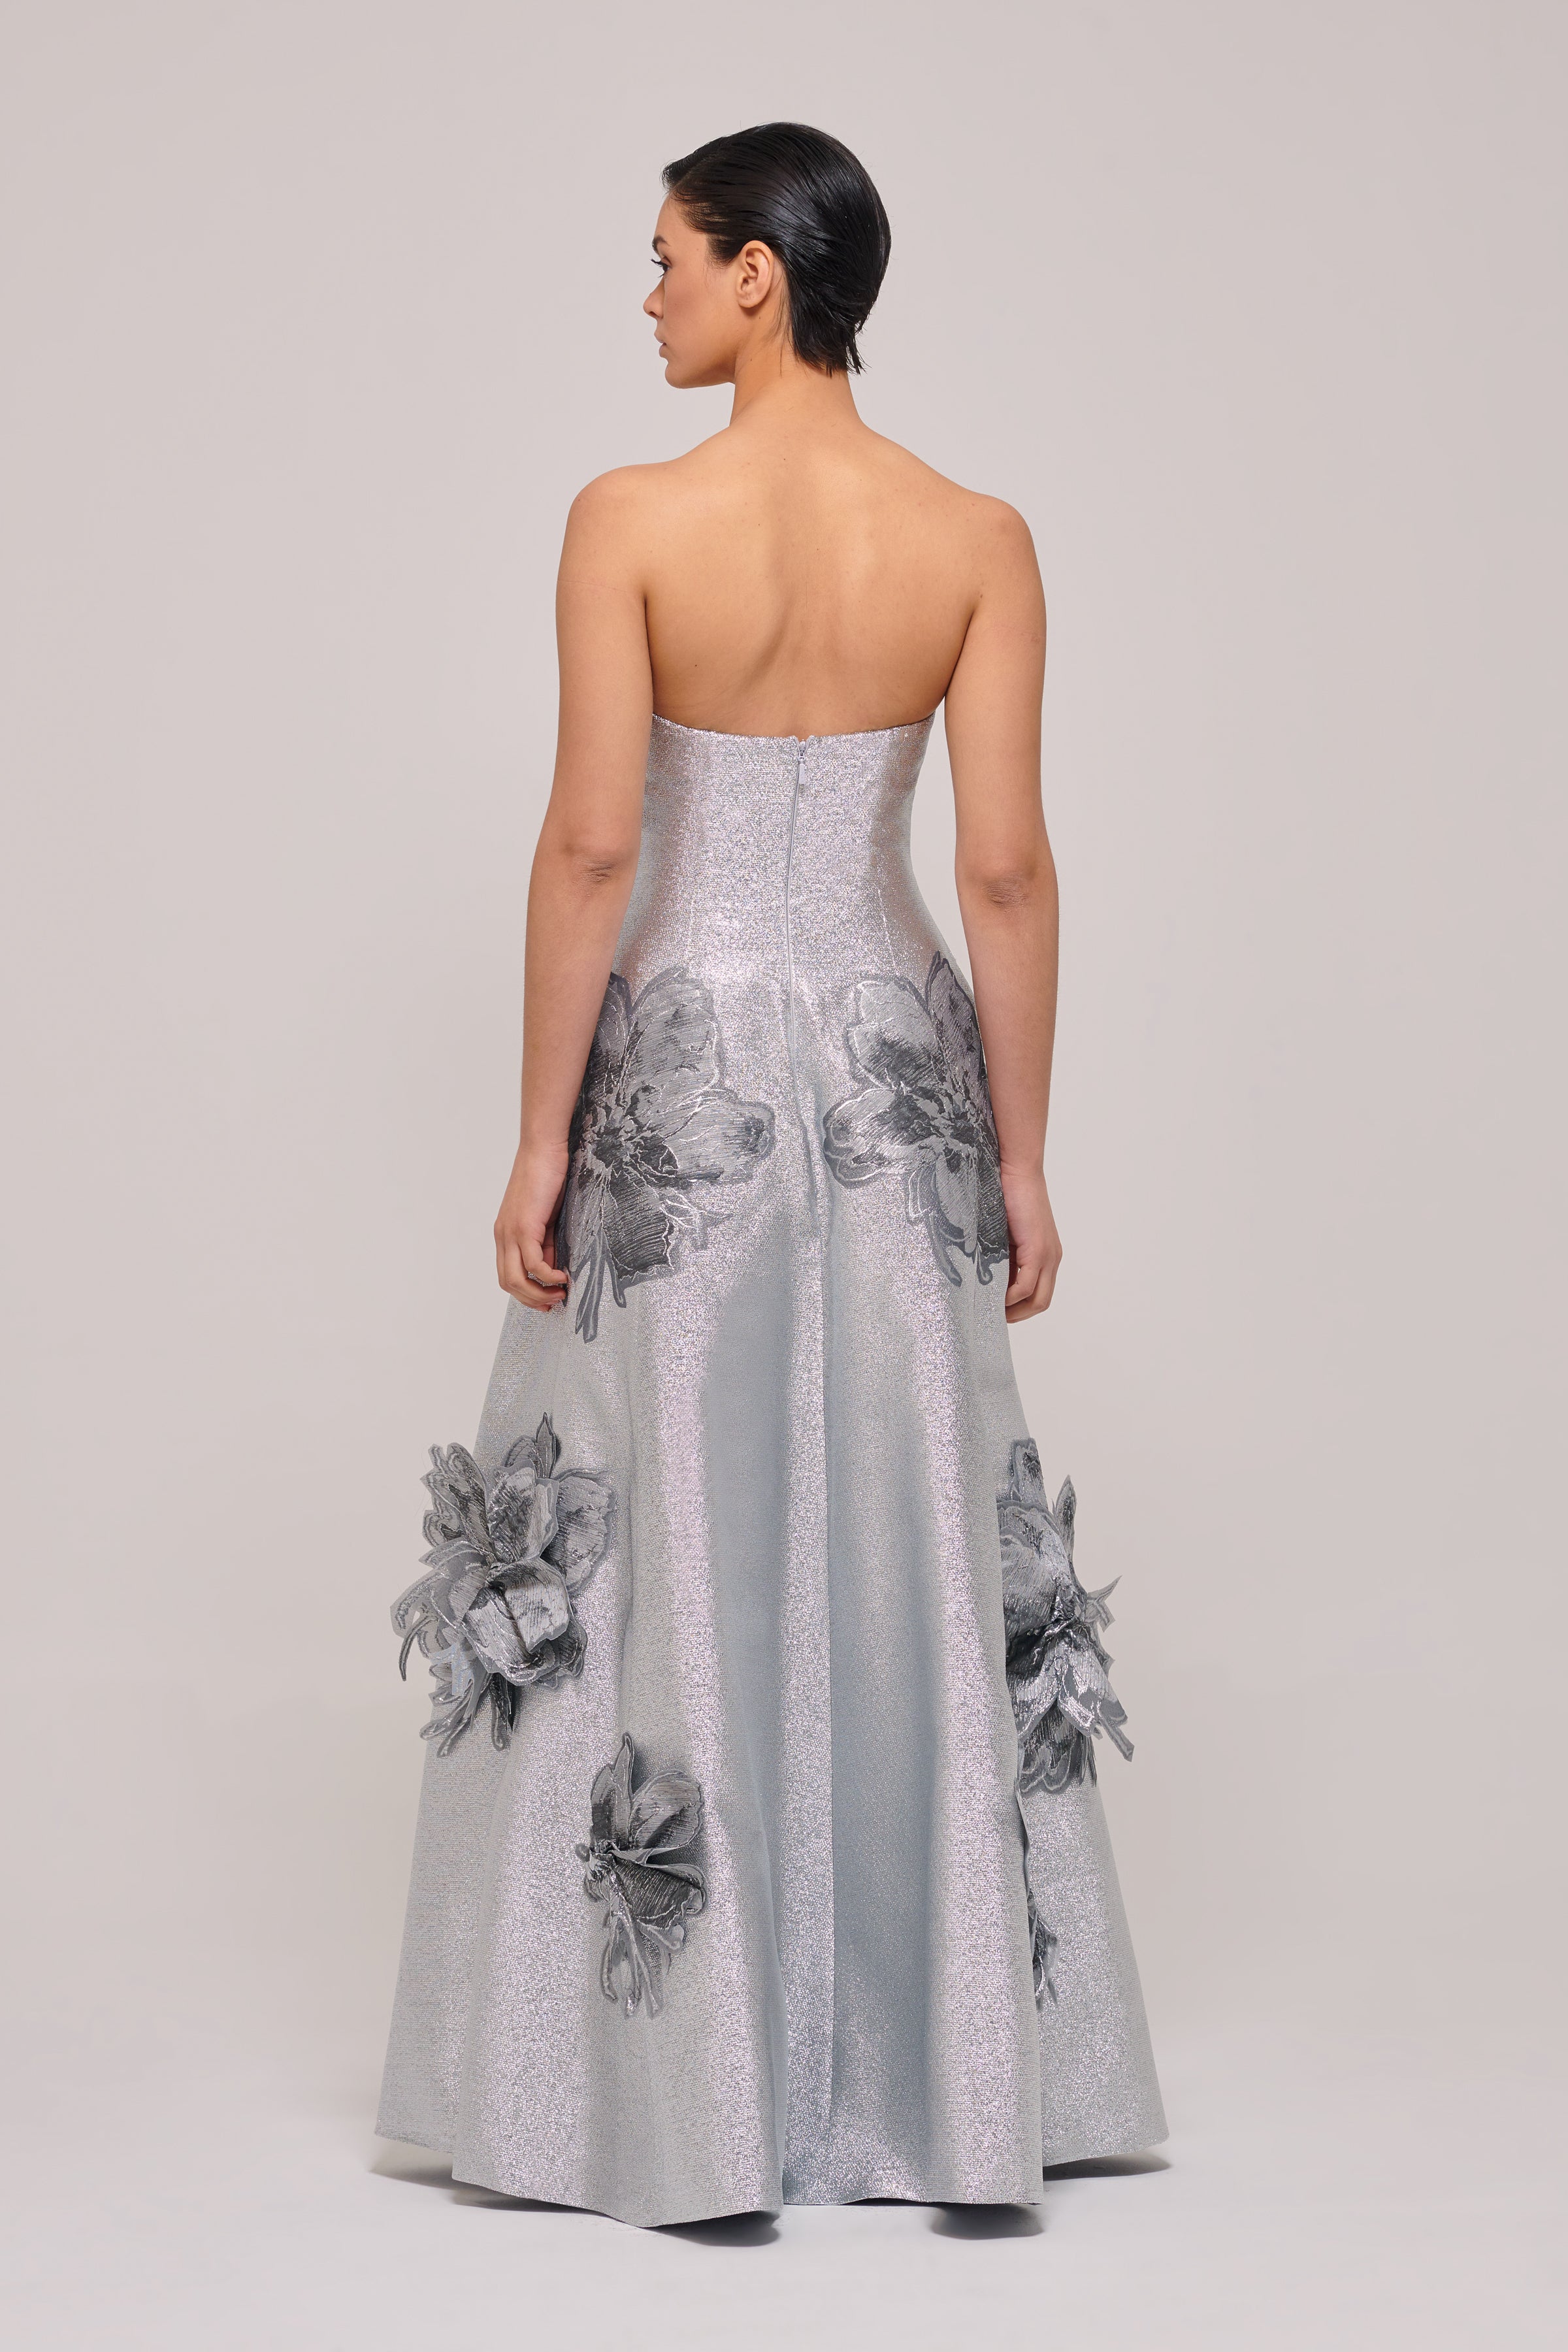 Three Dimensional Floral Strapless Black and Silver Gown